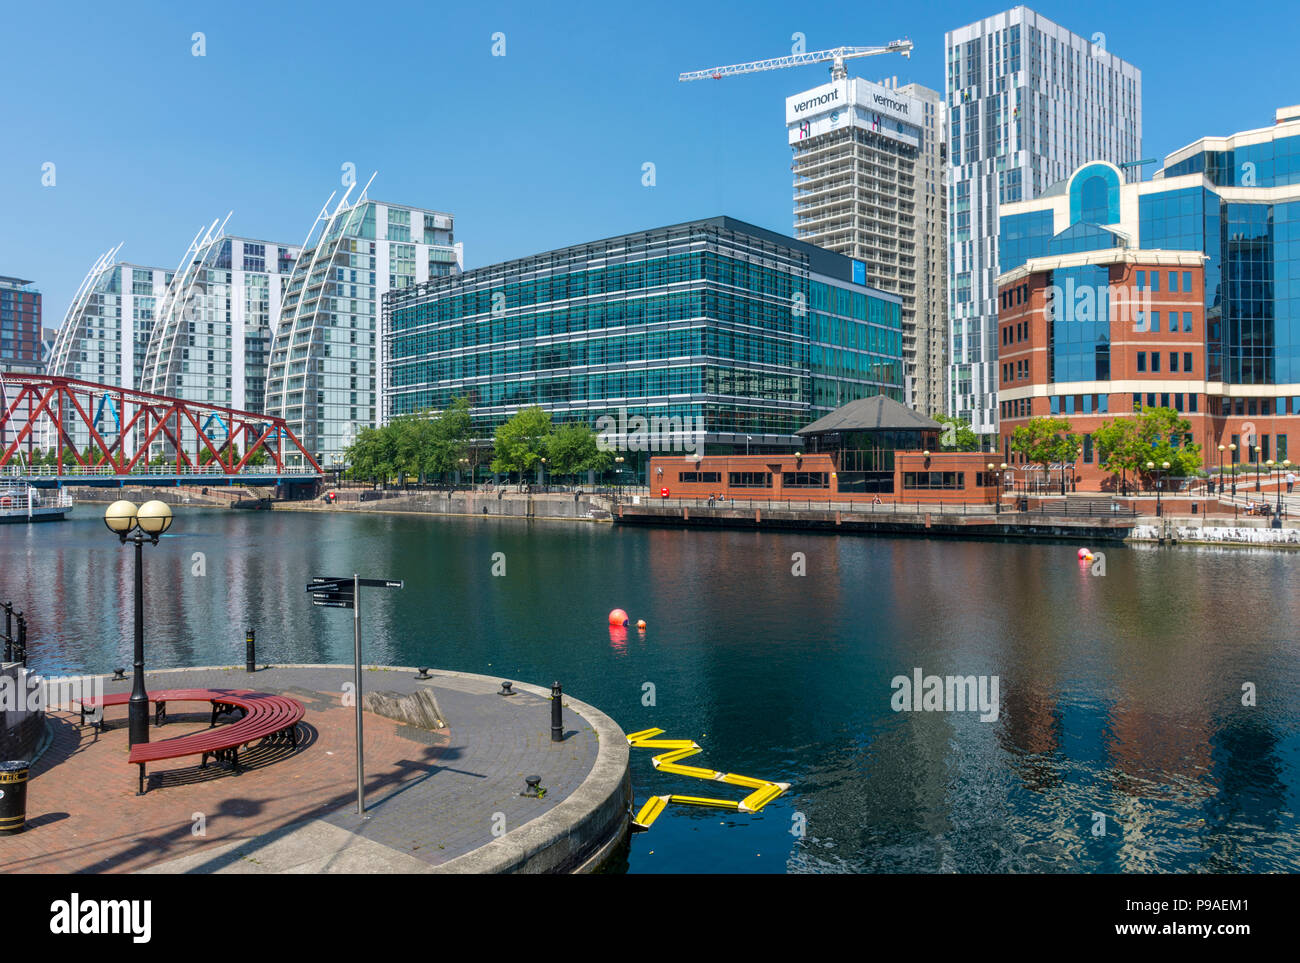 The Bupa Place building (formerly the Regent) office building, Erie Basin, Salford Quays, Manchester, England, UK. Stock Photo